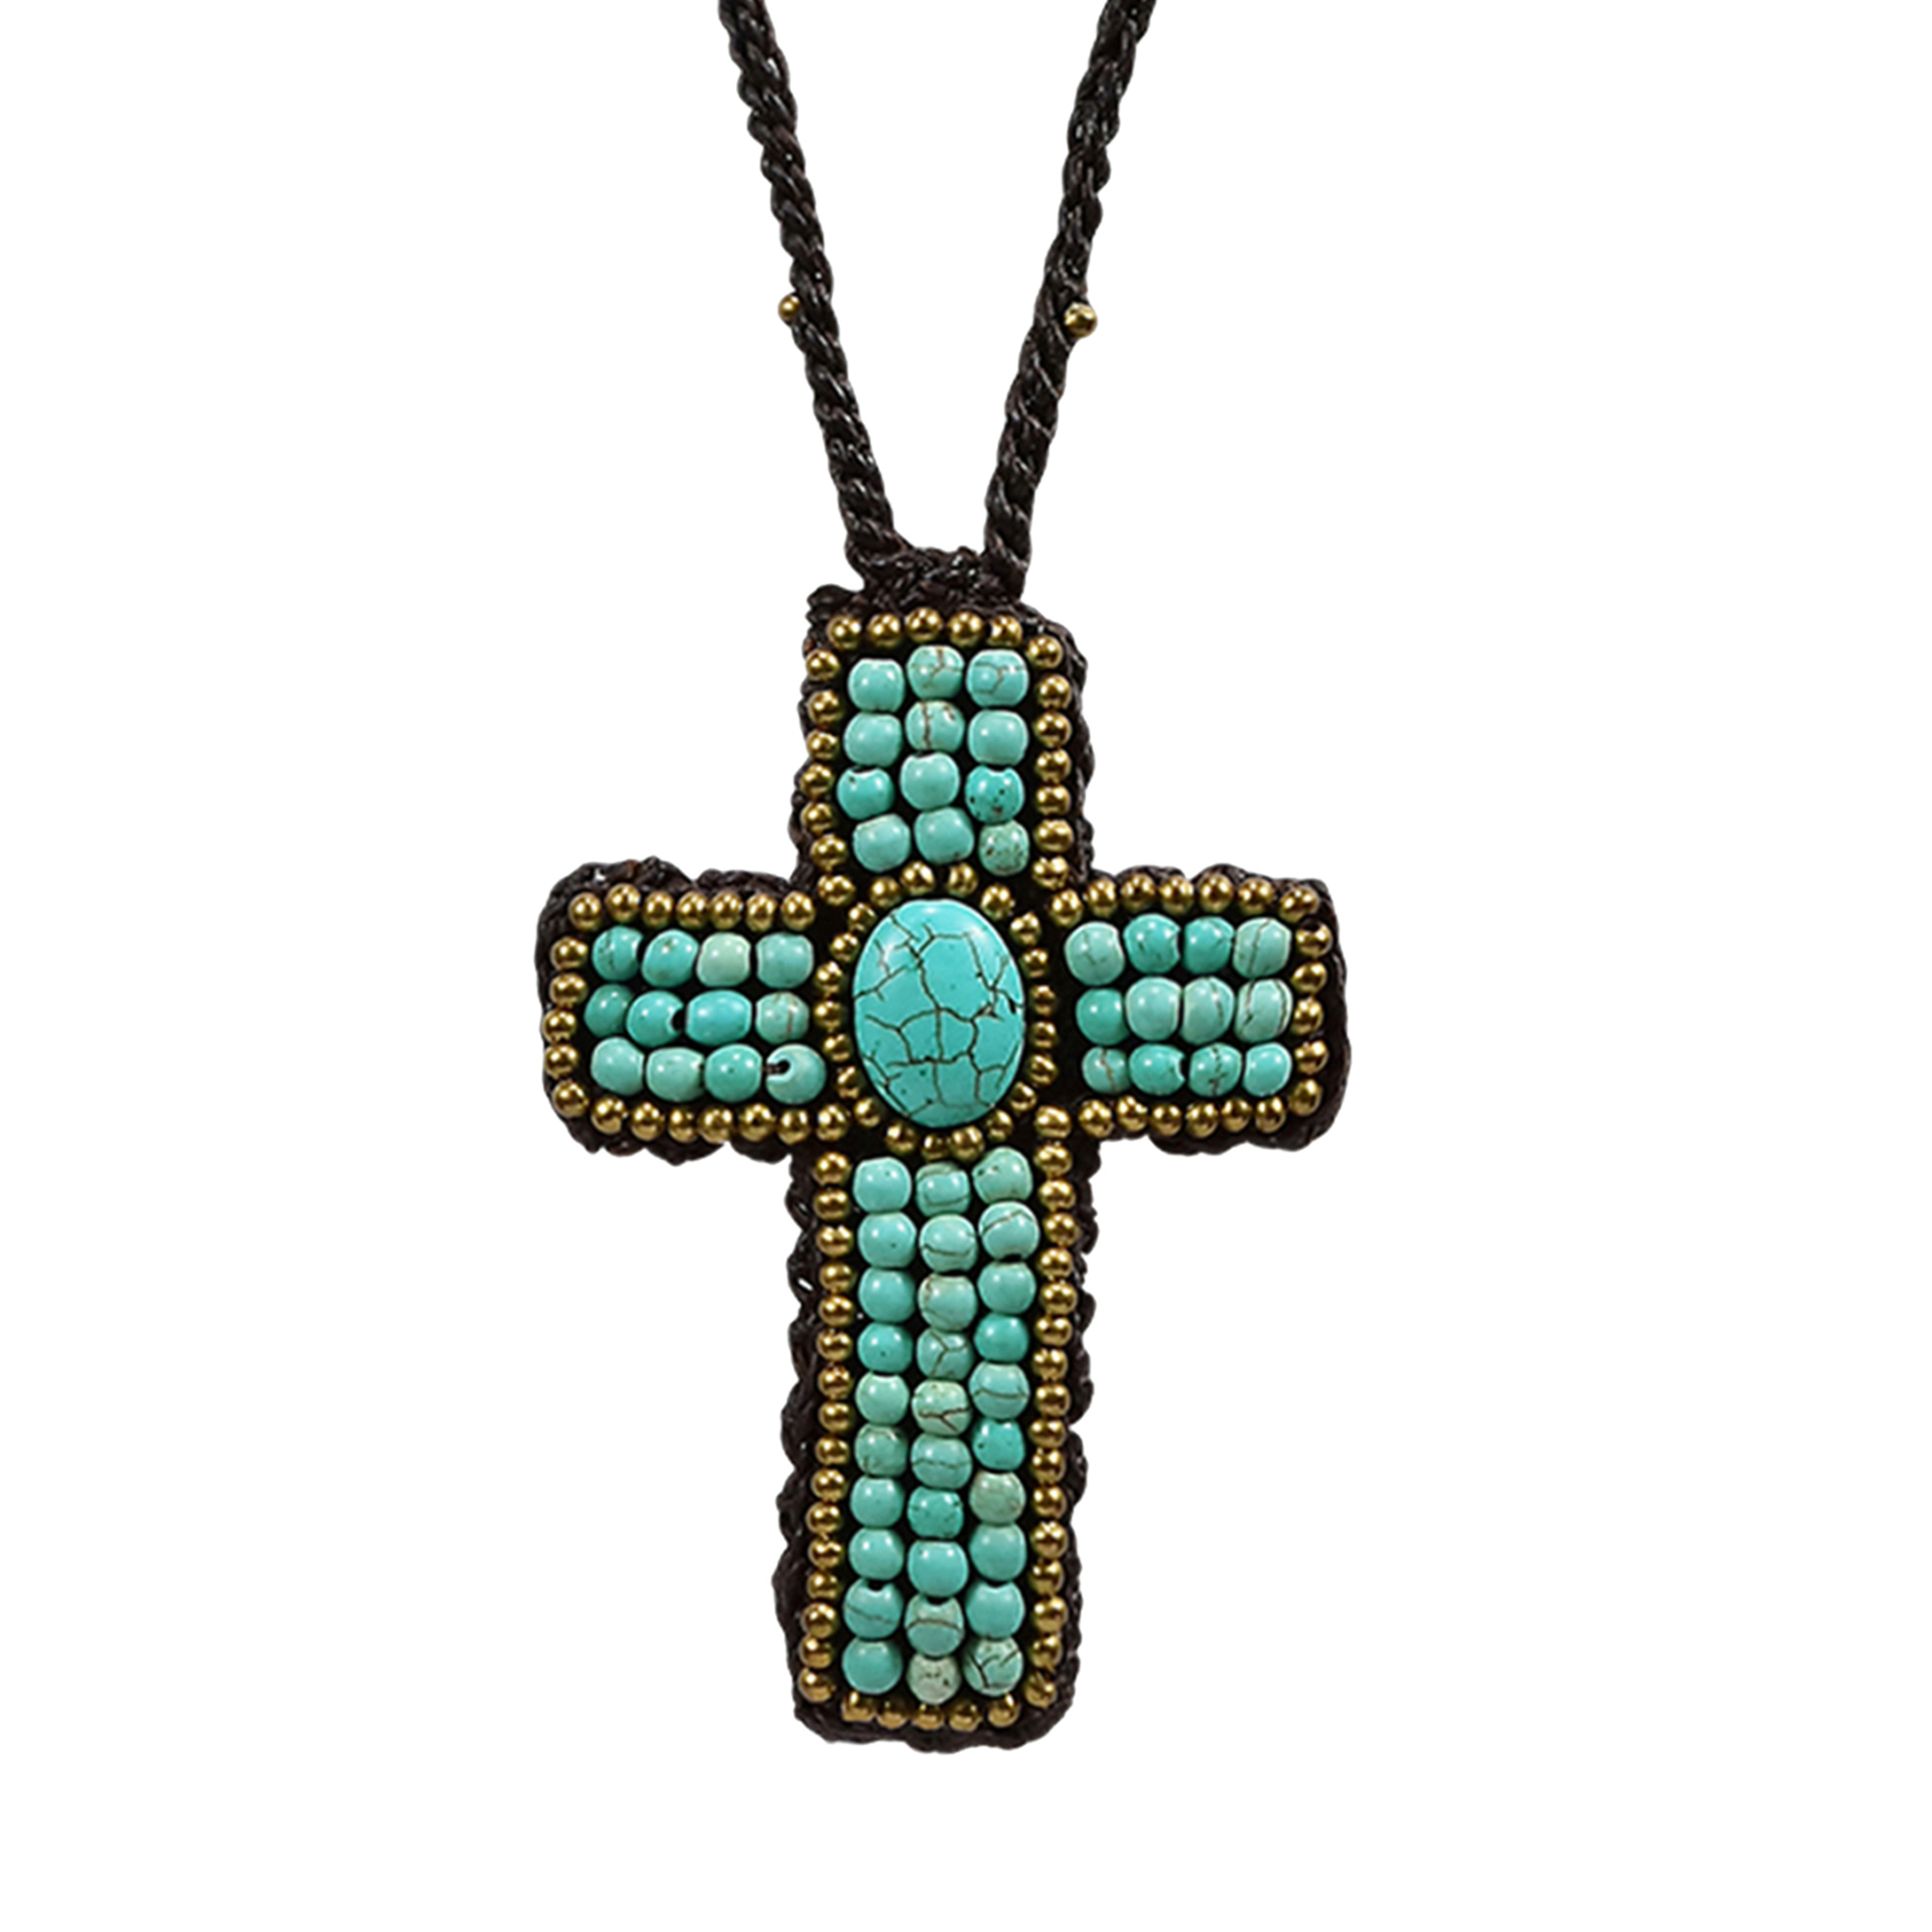 Antique Cross Turquoise Stone Brass Embellished Long Necklace - image 1 of 5